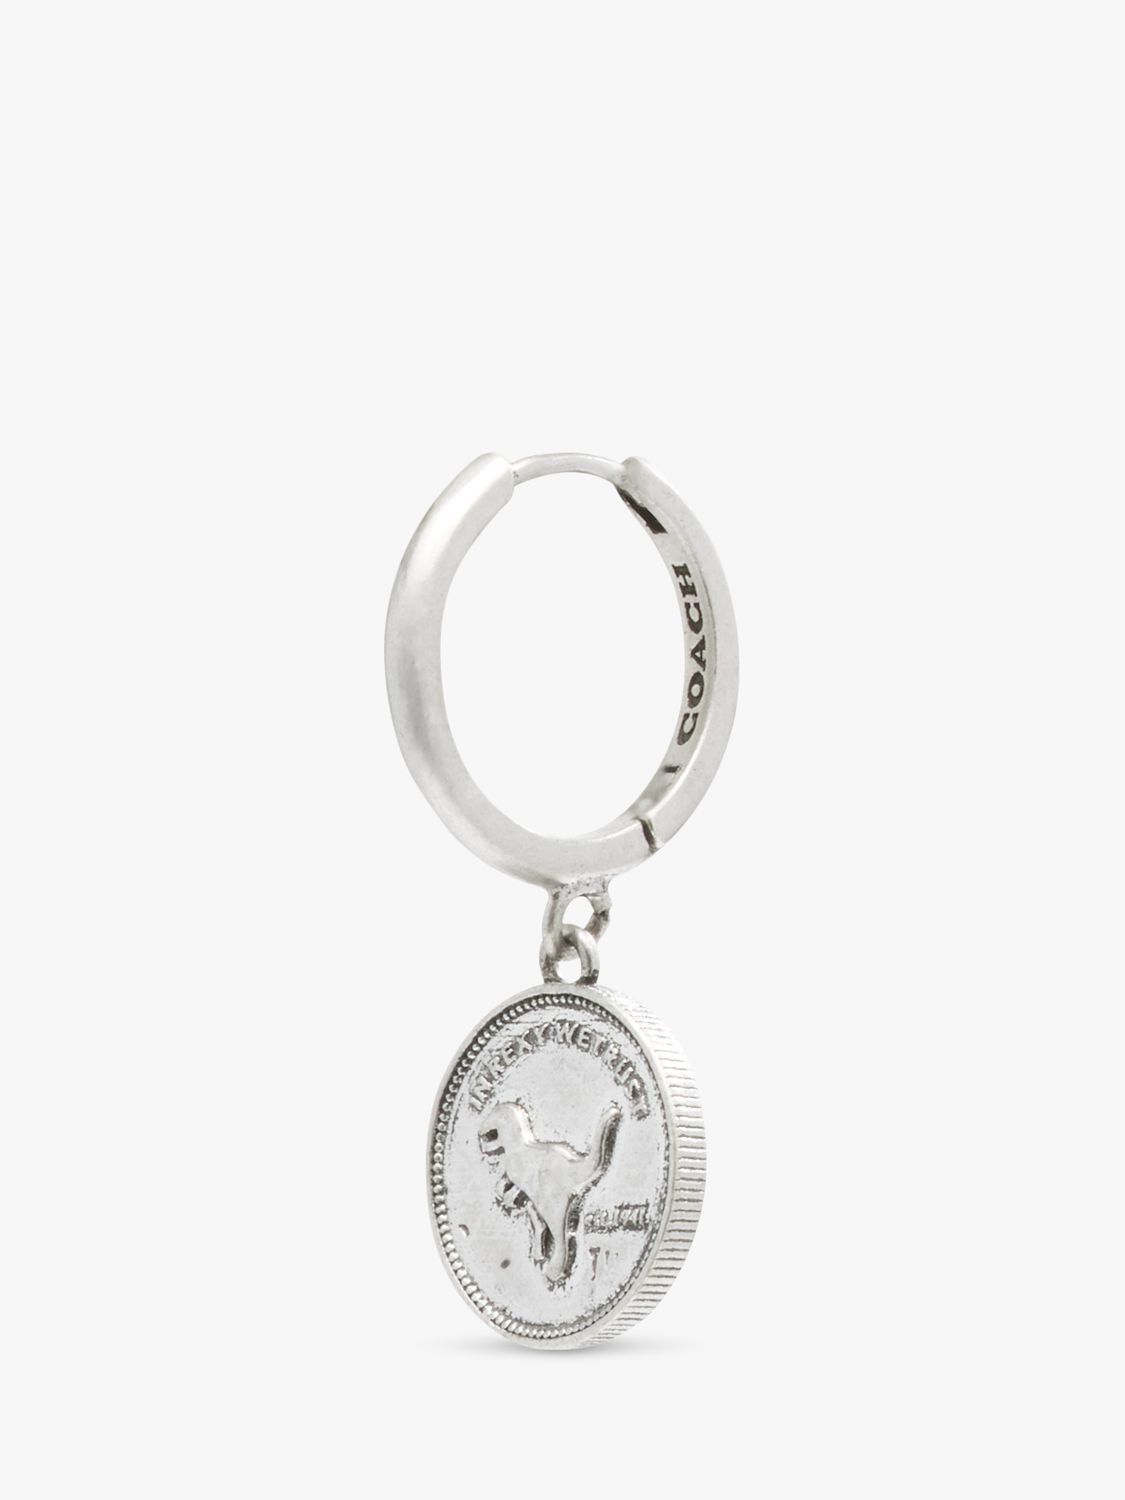 Buy Coach Rexy Dino Charm Single Hoop Earring, Silver Online at johnlewis.com